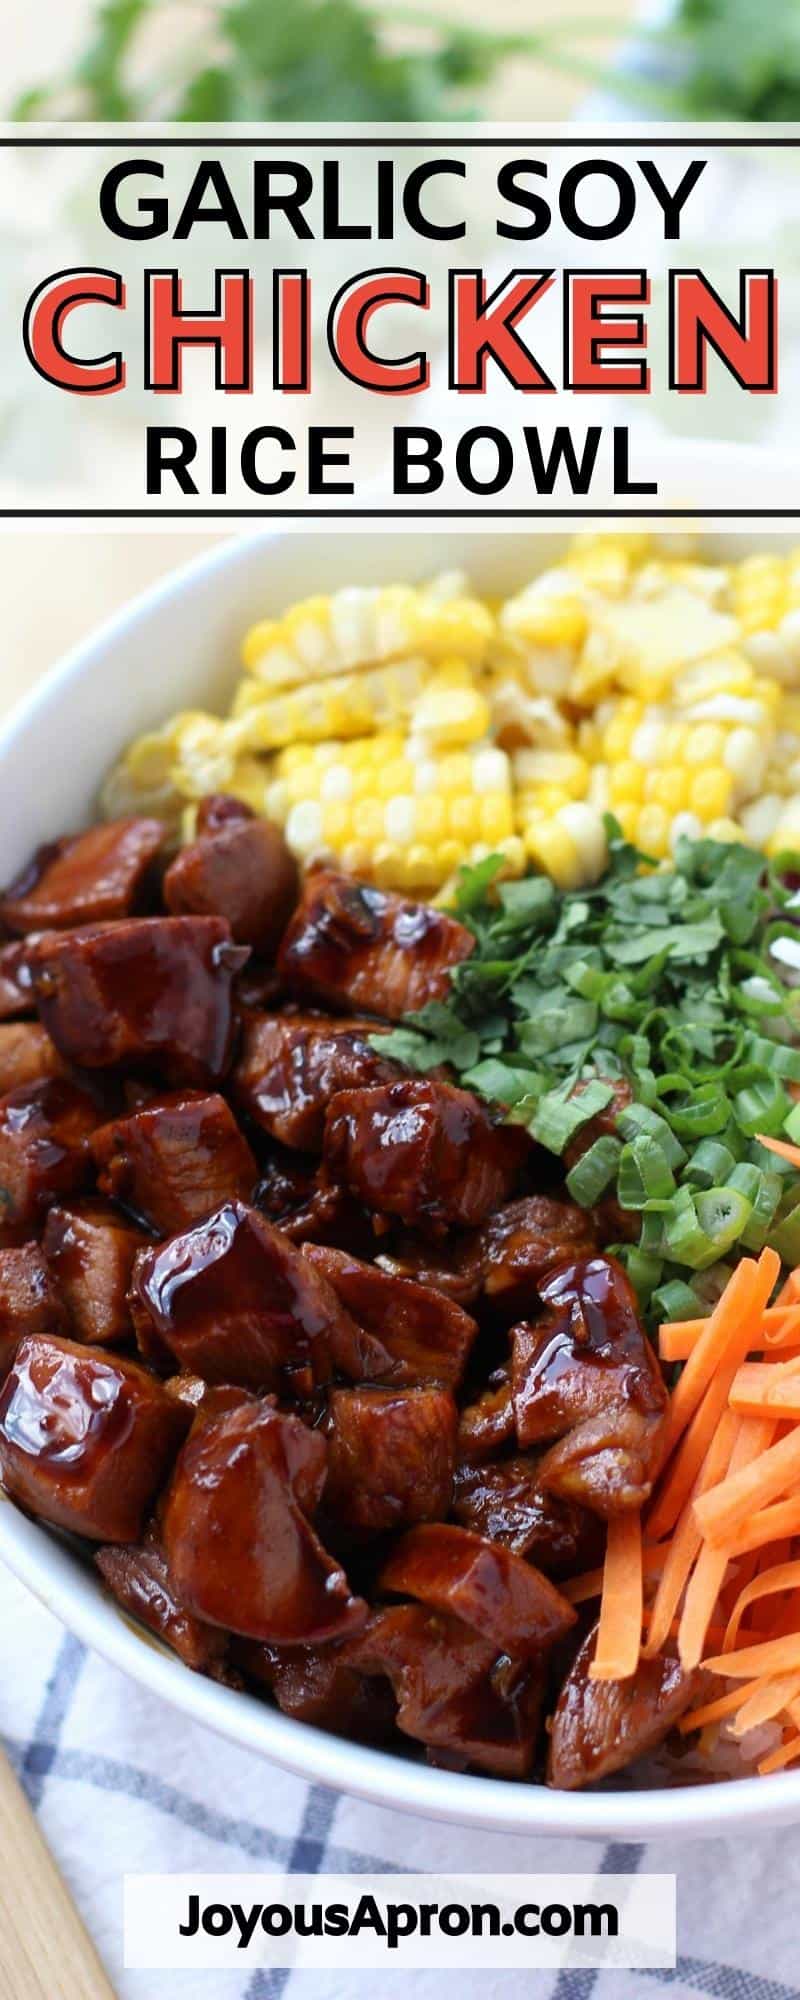 Garlic Soy Chicken and Veggie Rice Bowl - easy Asian bowl recipe! Rice bowl topped with diced white meat chicken, sautéed in a sticky, sweet and savory soy-based sauce. Combined with crunchy veggies, scallions, and cilantro. Healthy, easy and full of great flavors and textures! via @joyousapron